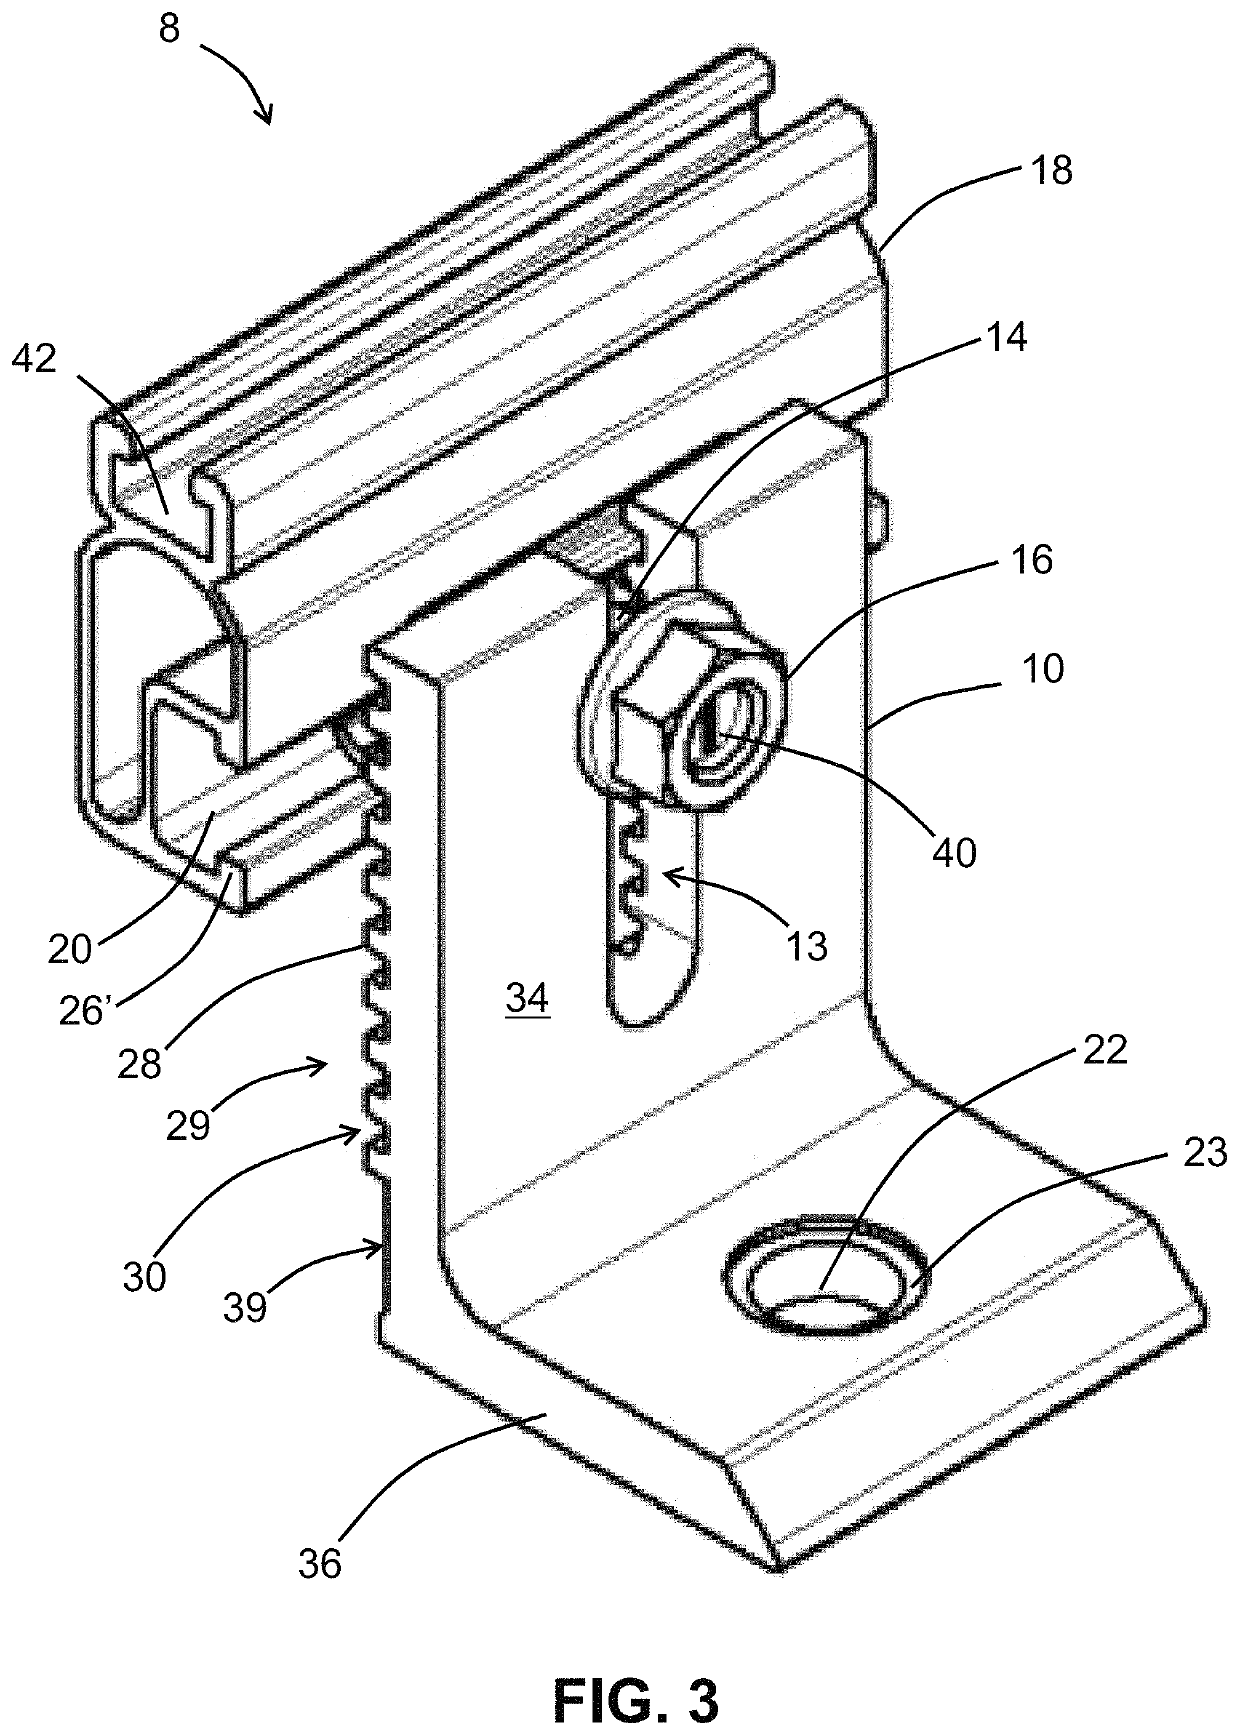 Corrugated washer for use with a corrugated L-foot mounting bracket for mounting solar panels to a roof